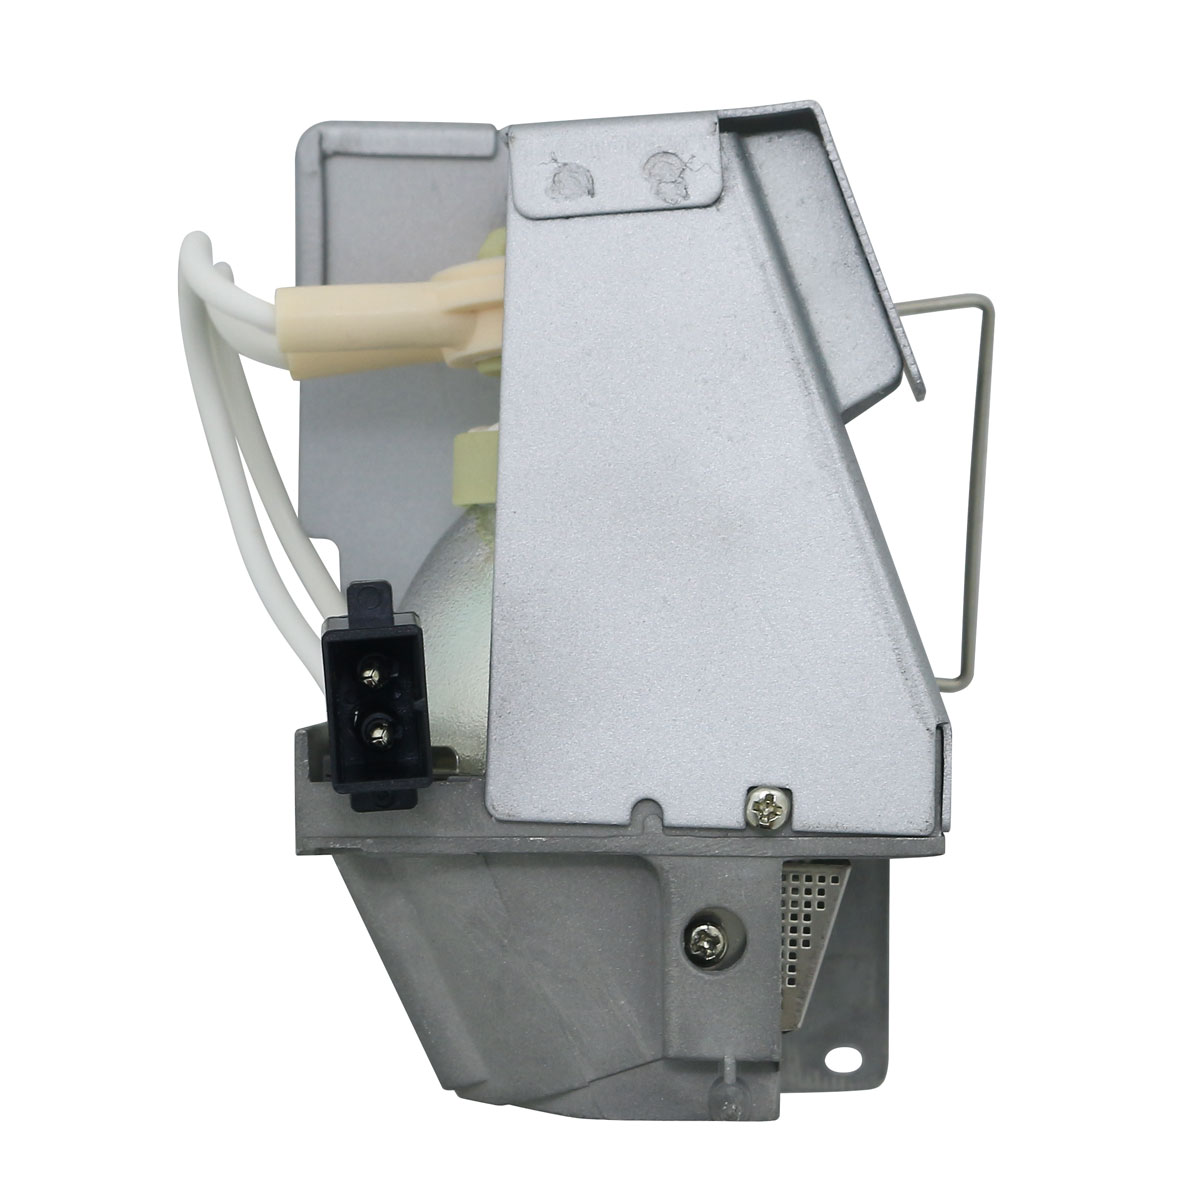 Original Osram Projector Lamp Replacement with Housing for InFocus SP-LAMP-100 - image 4 of 6